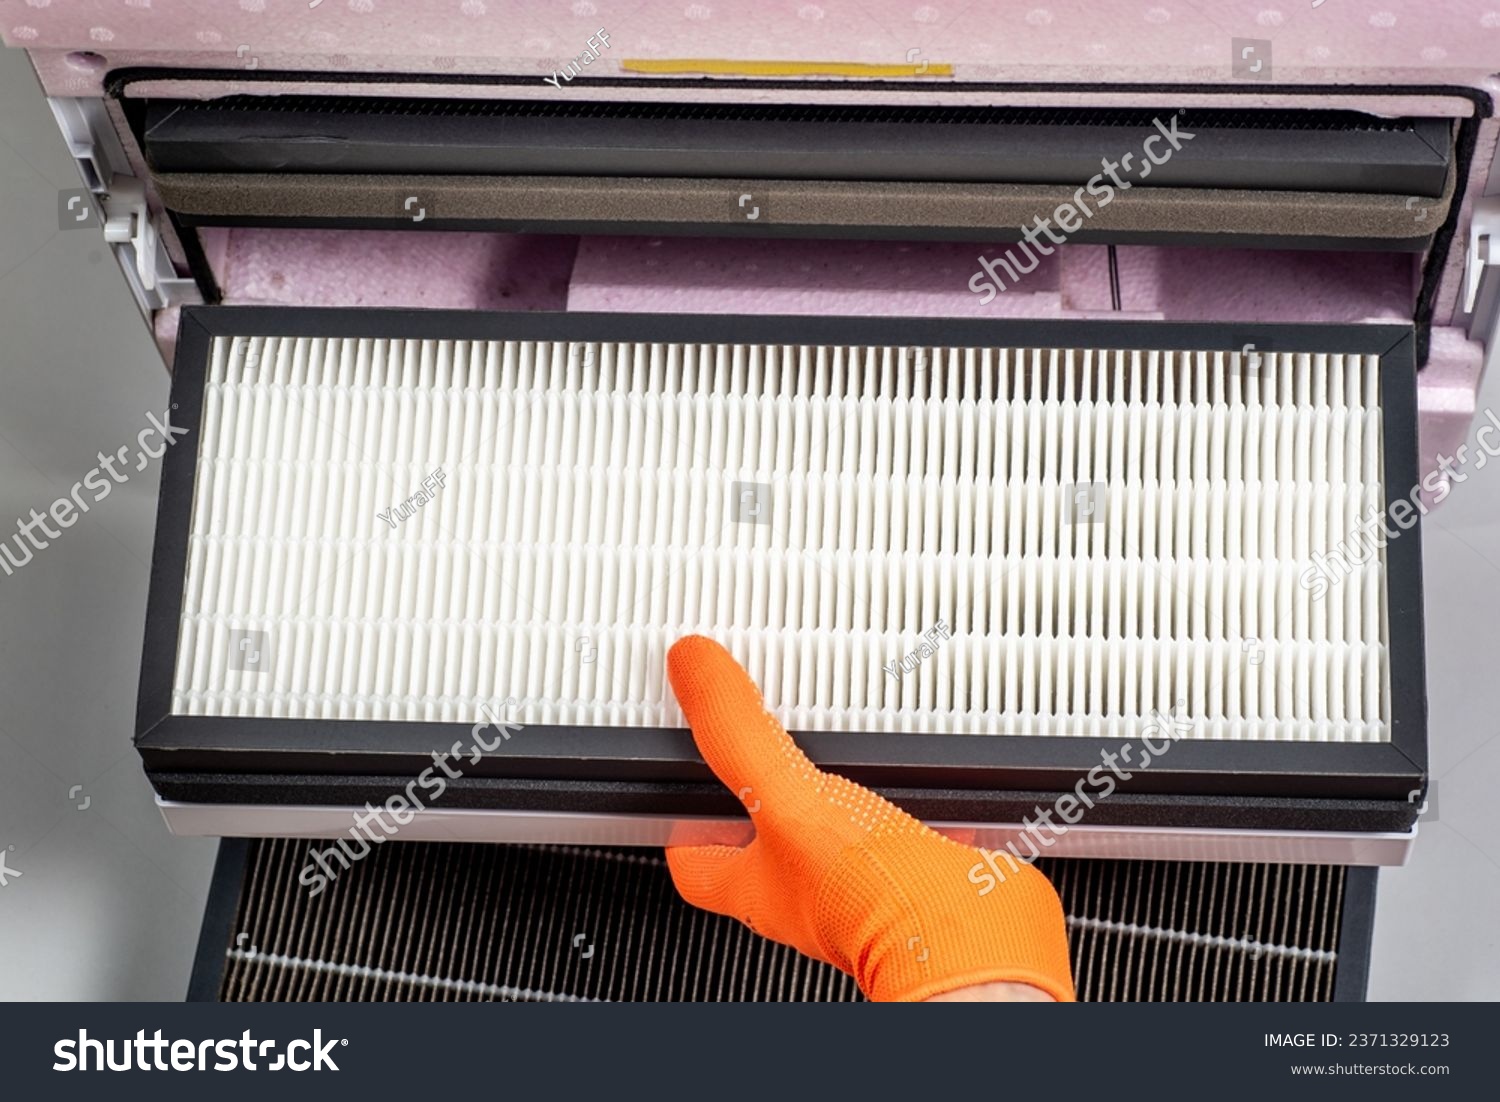 Replacing filters in a home ventilation system. A hand in an orange glove changes a Hepa filter. #2371329123